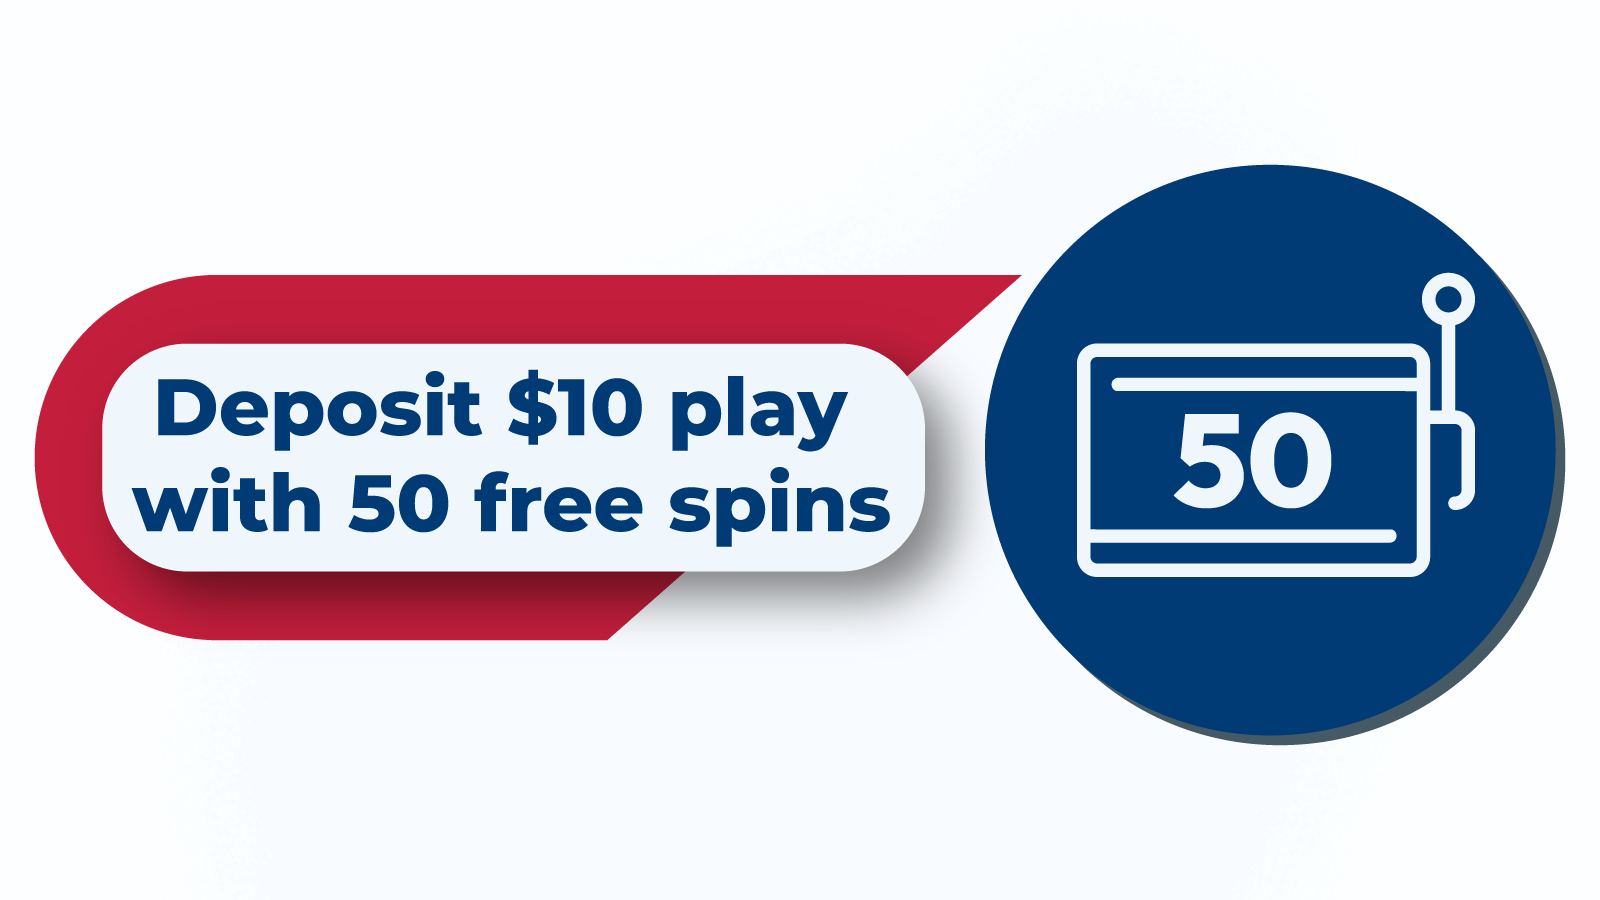 Deposit $10 play with 50 free spins